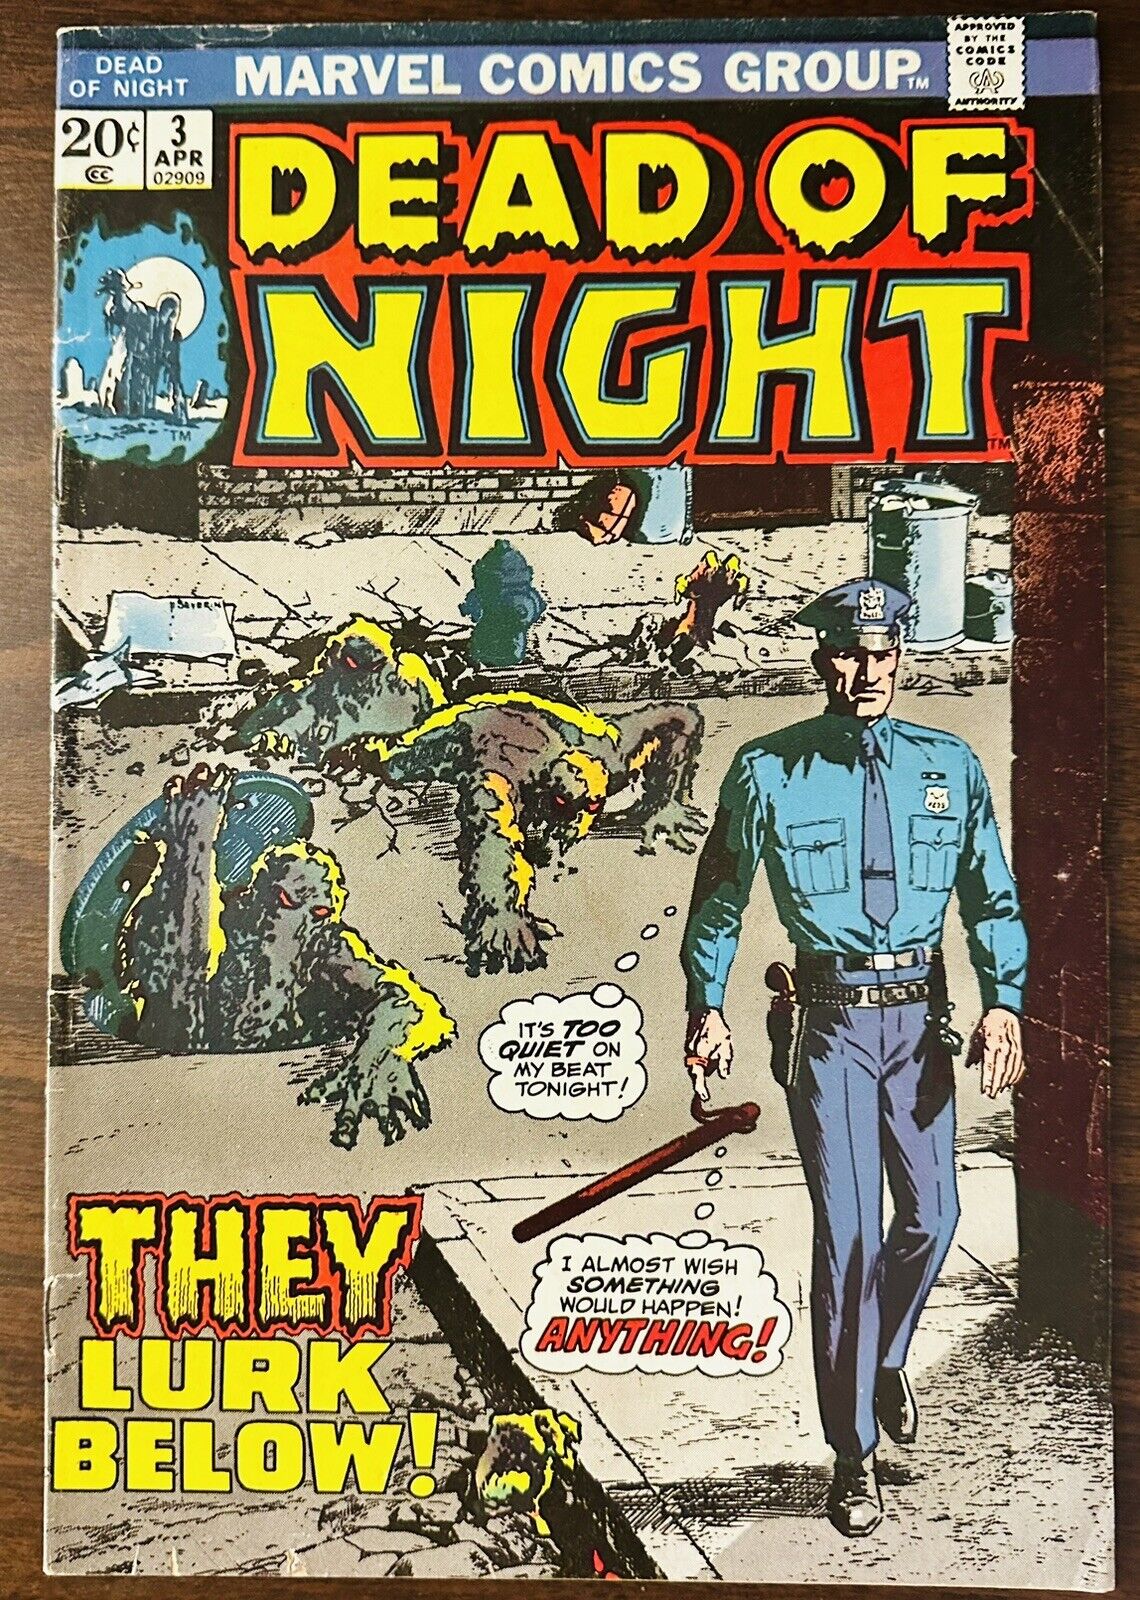 Dead Of Night #1 1973 VF/NM  Bronze Age Great Art Hard To Find One Of A Kind